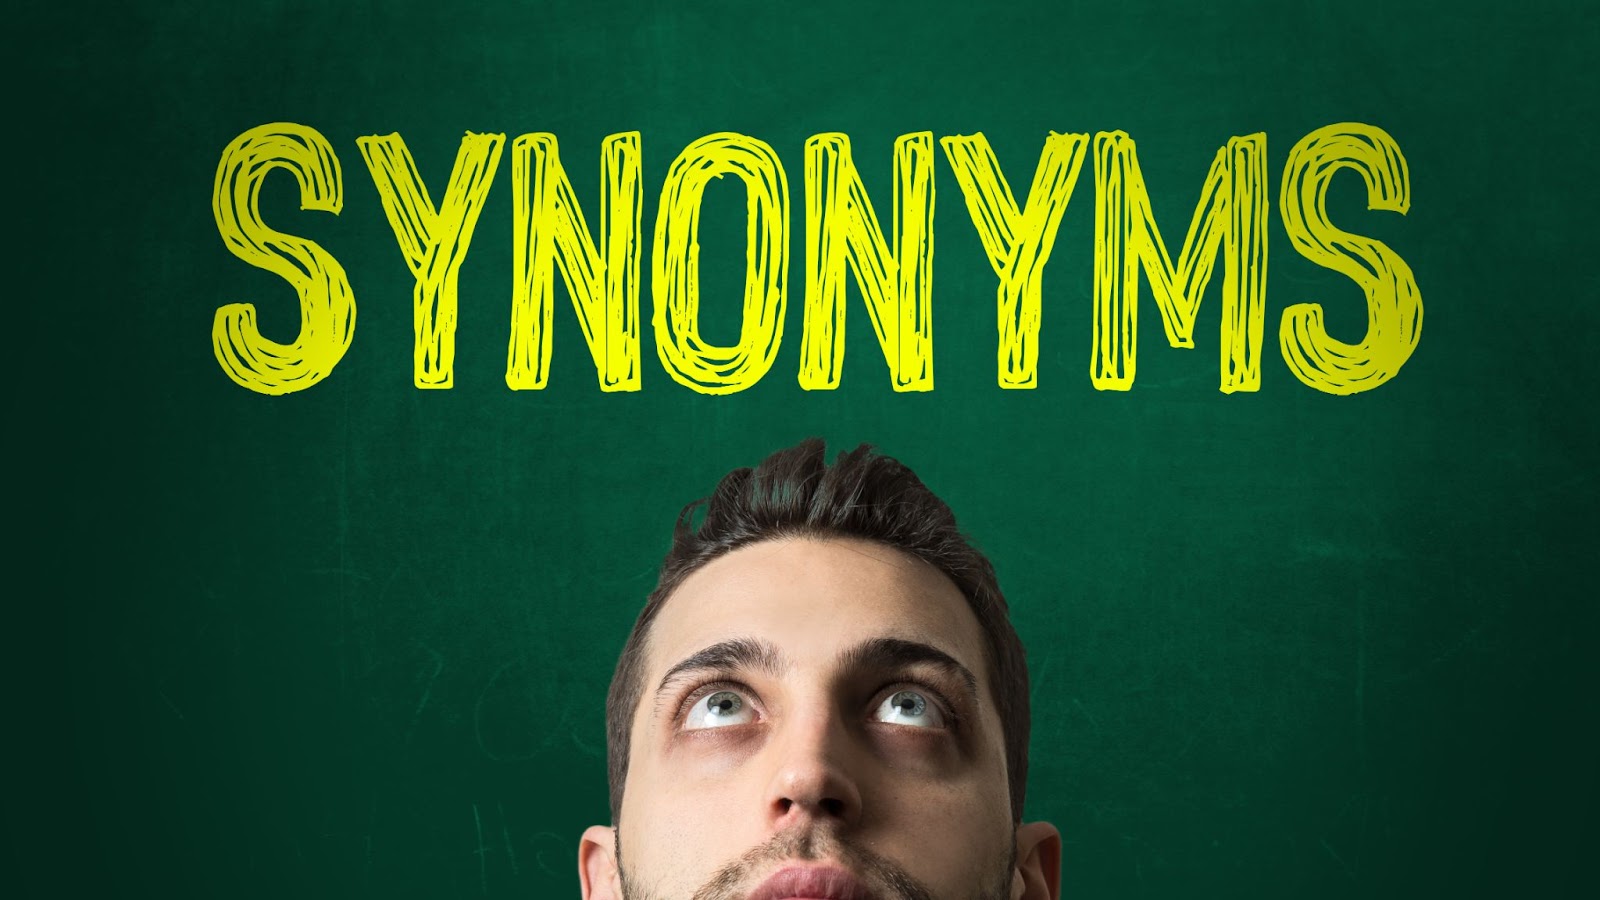 Synonyms and Antonyms for Writing: 5 Lessons . Writing Outcome